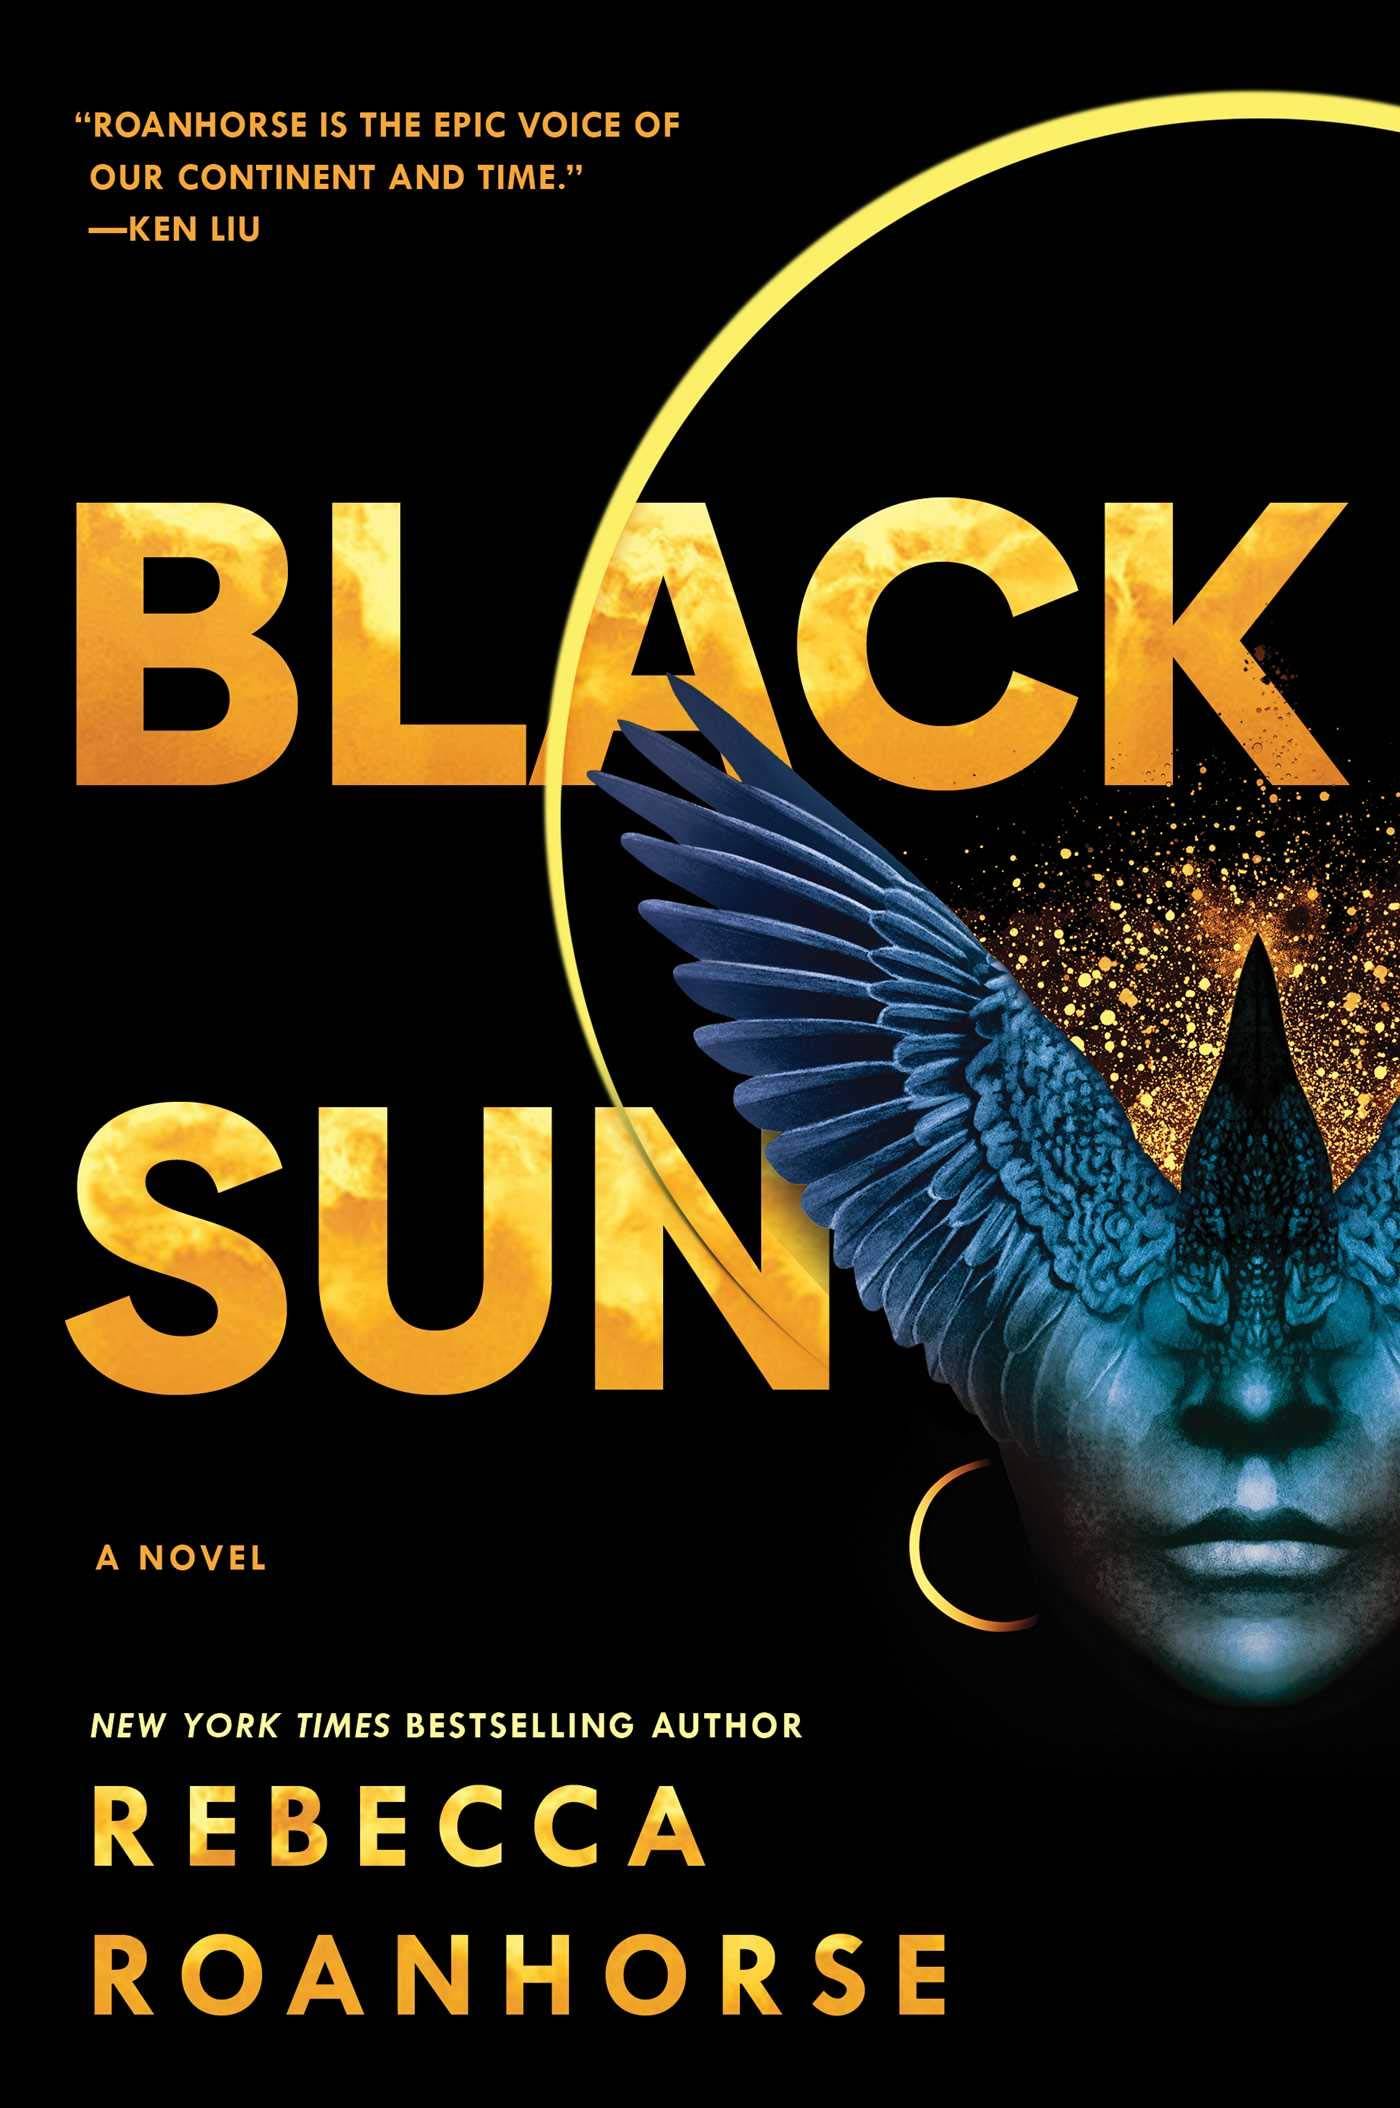 "Black Sun" black book cover featuring the lower half of a face that merges into the wings of a bird.